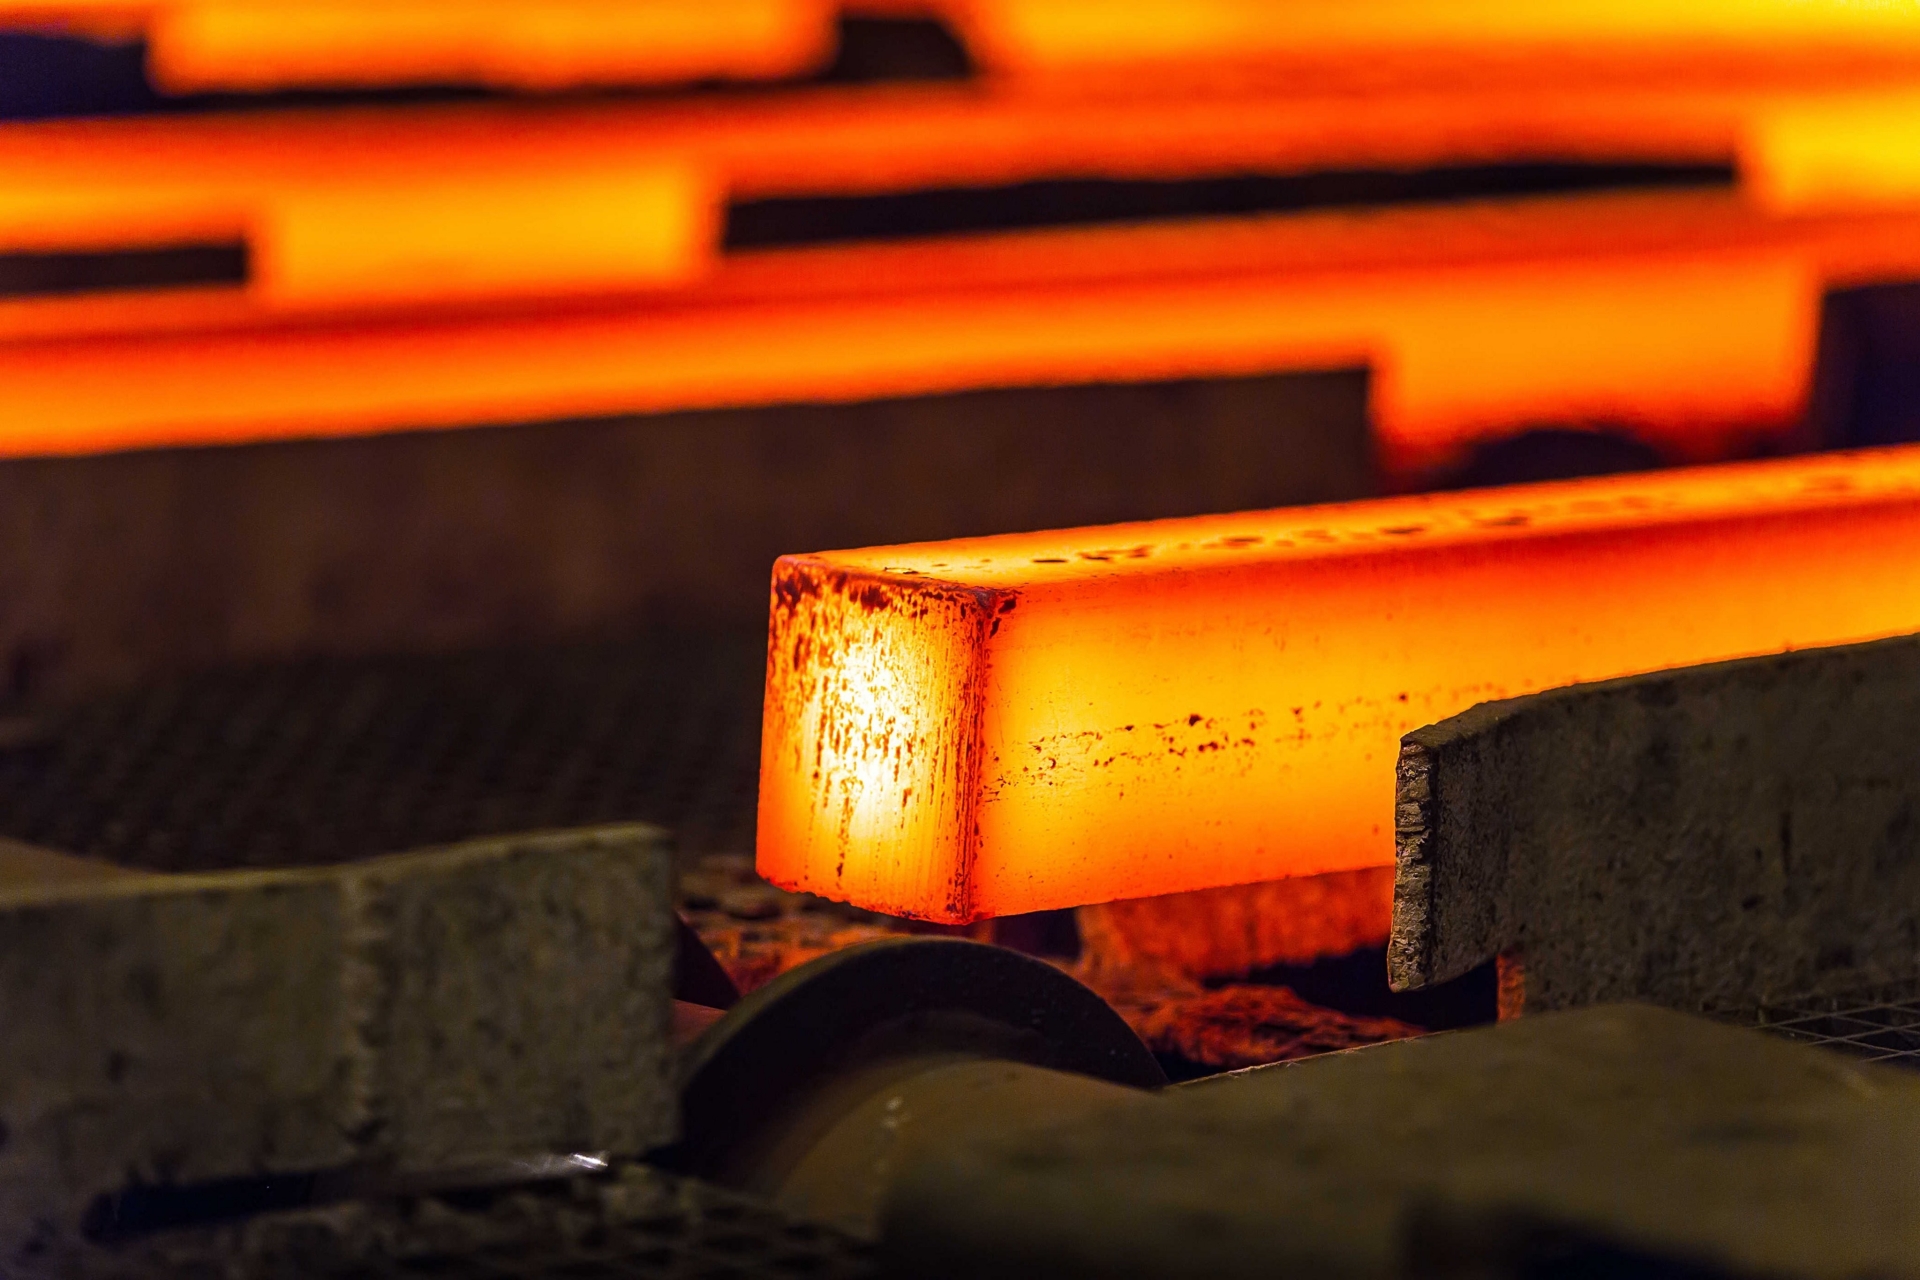 Steel producers report heavy losses for second consecutive quarter